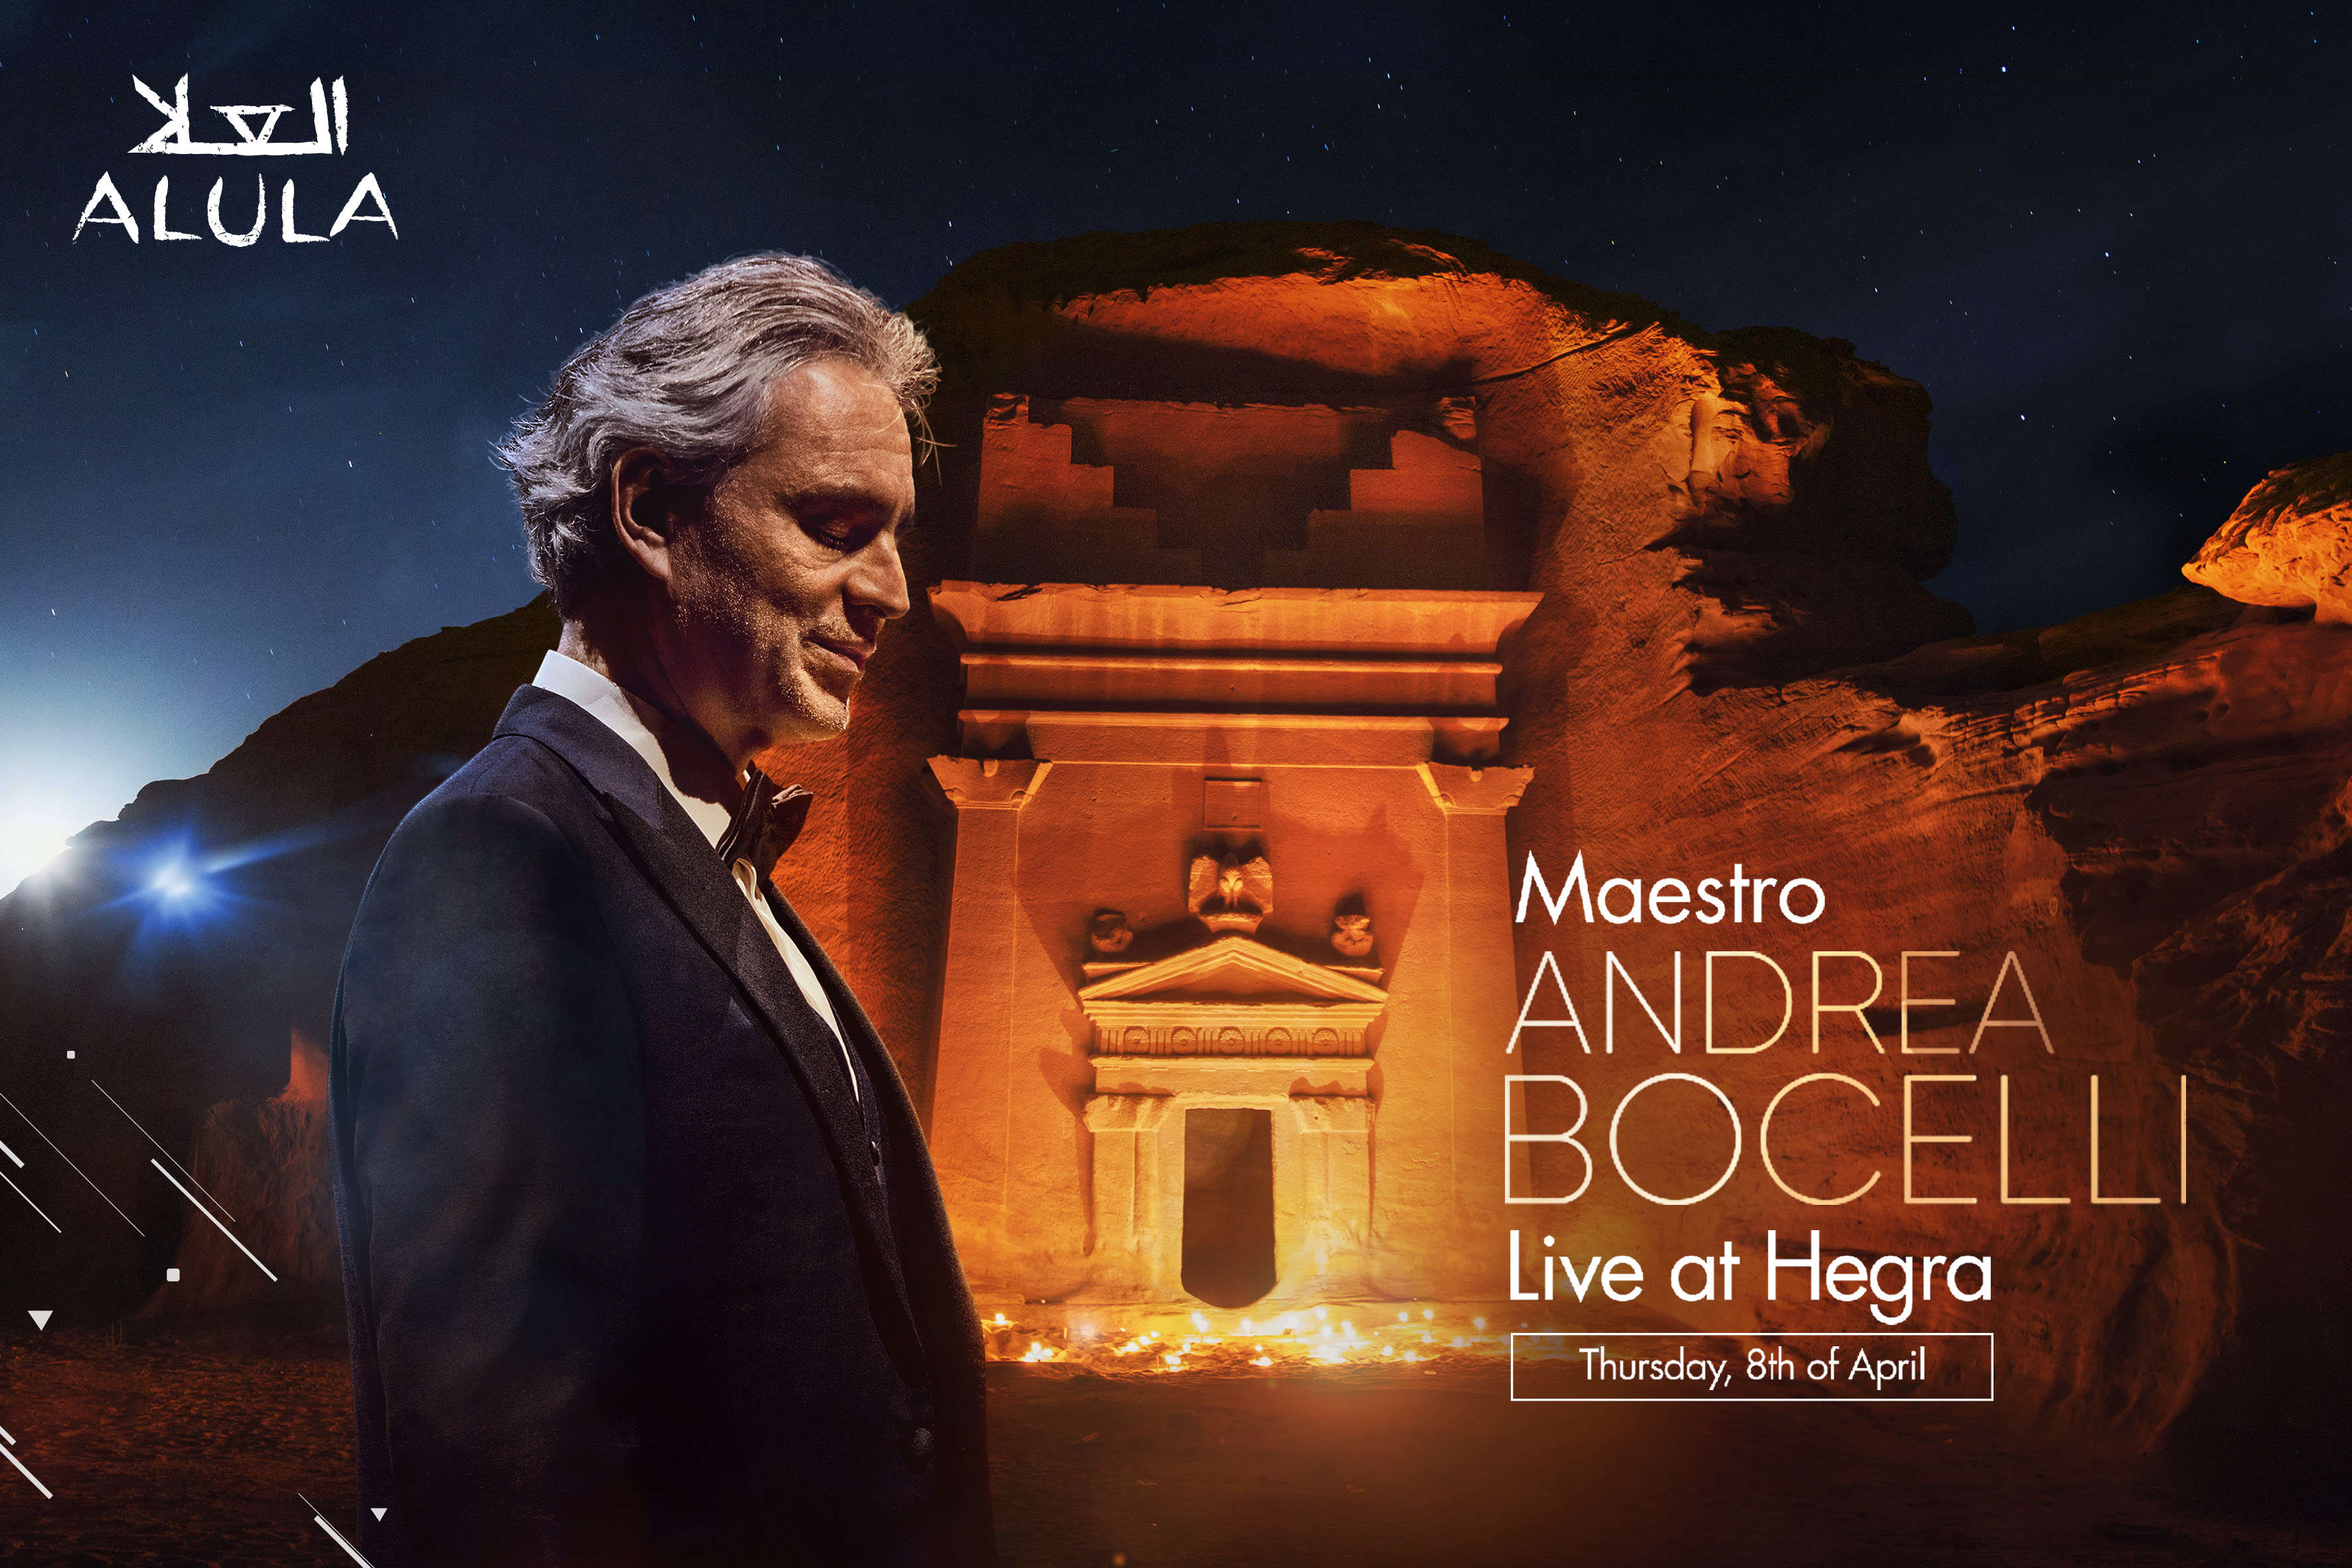 Andrea Bocelli performs a world first concert at Hegra